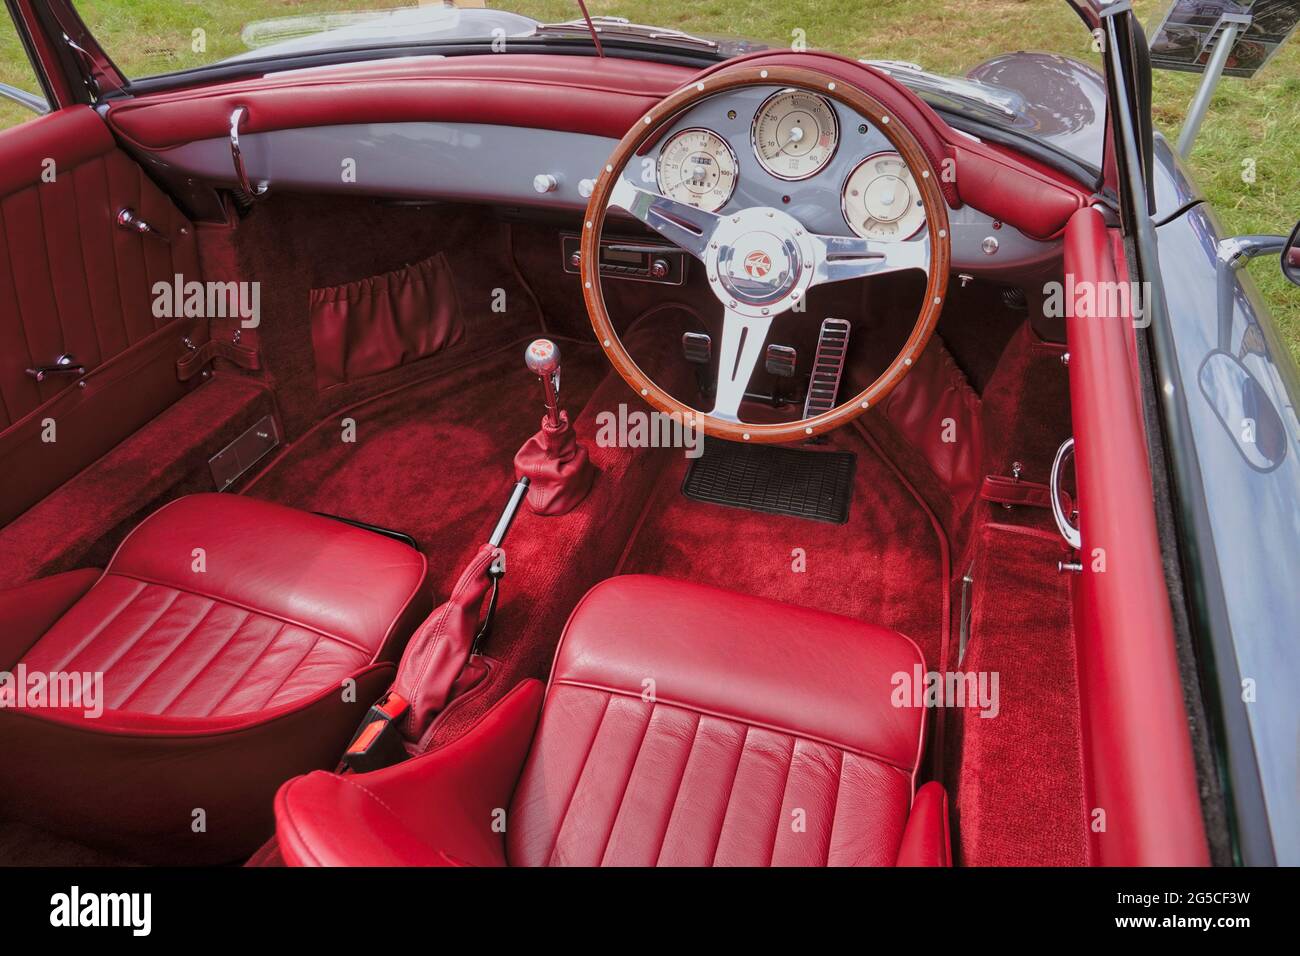 Brentford, UK. 25th June 2021. Scenes at the LONDON CLASSIC Car Show - here, The cockpit of a Chisel renovated Porsche. Credit: Motofoto/Alamy Live News Stock Photo